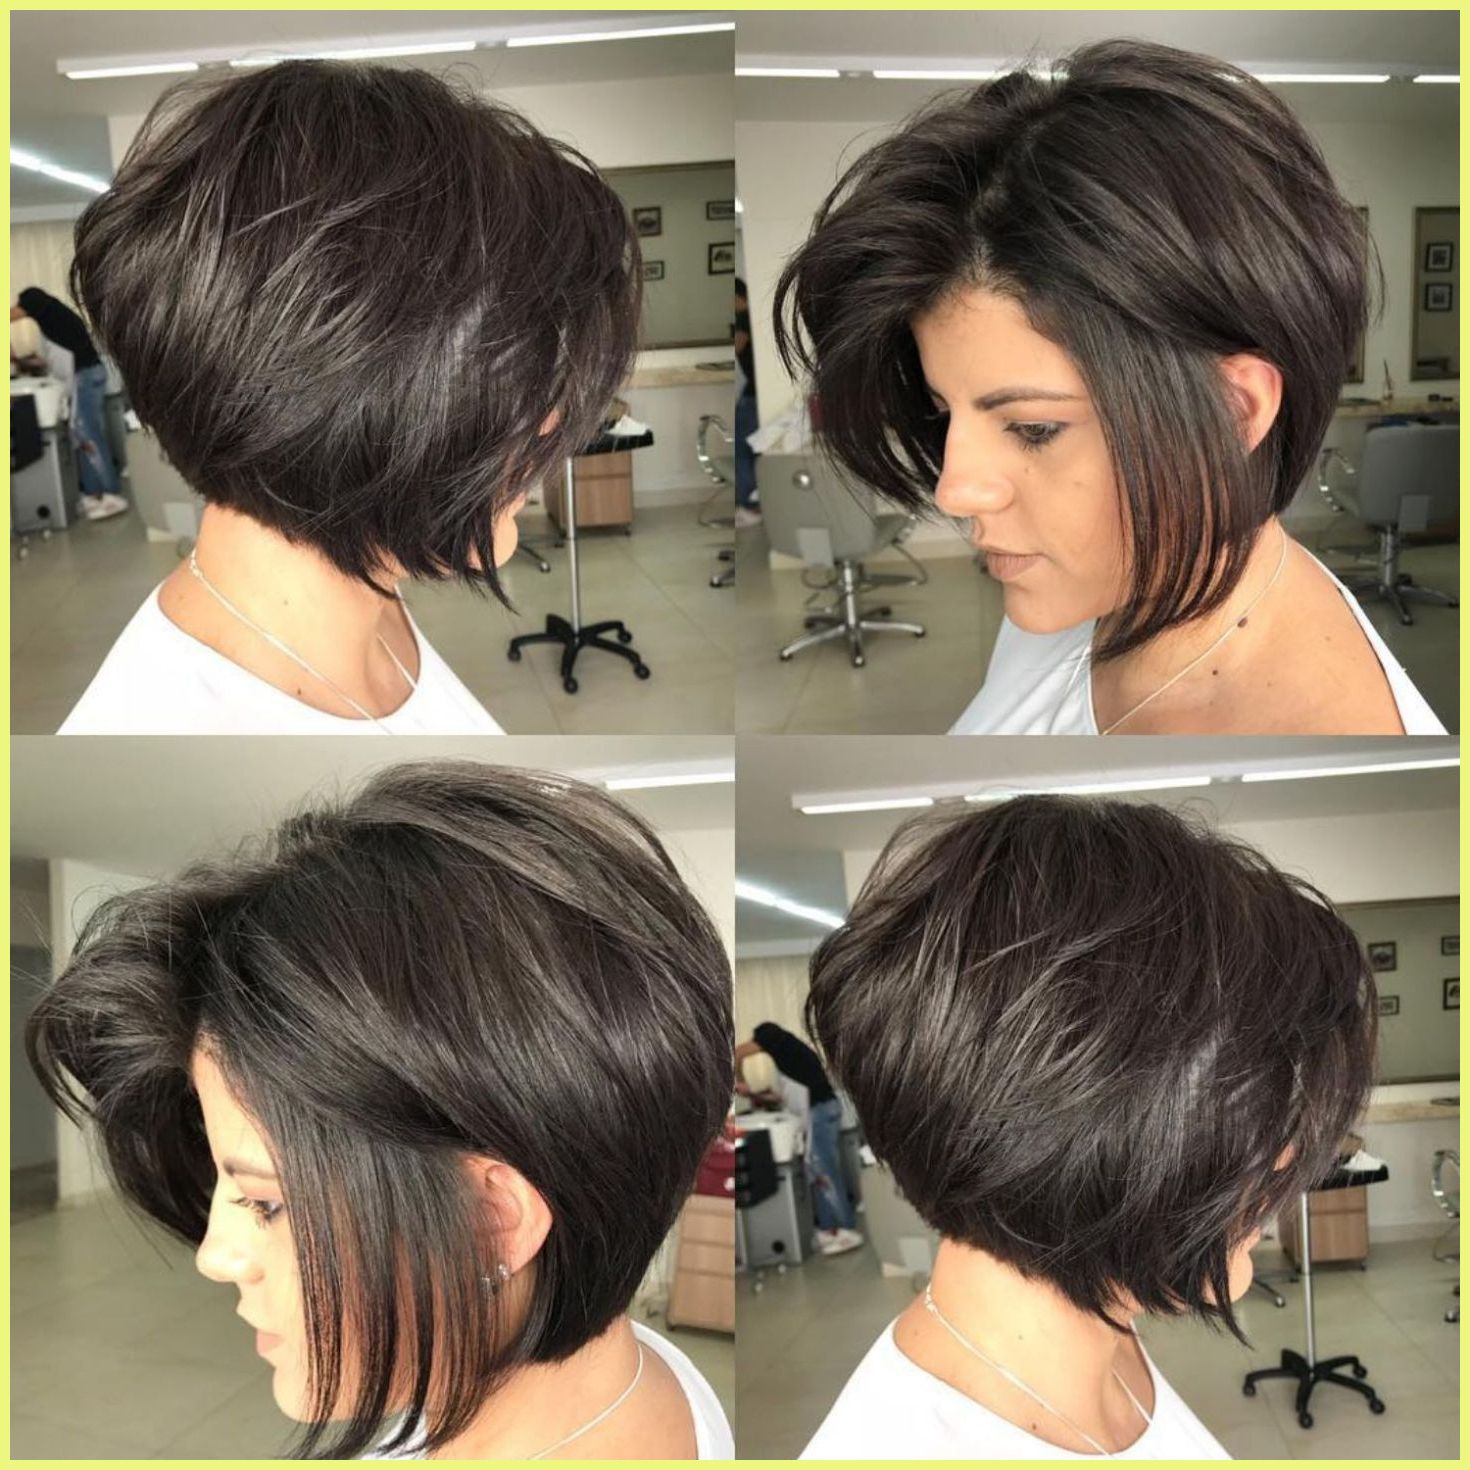 2017 Black Angled Bob Hairstyles With Shaggy Layers With Bob Hairstyles Archives – Contener (View 15 of 20)